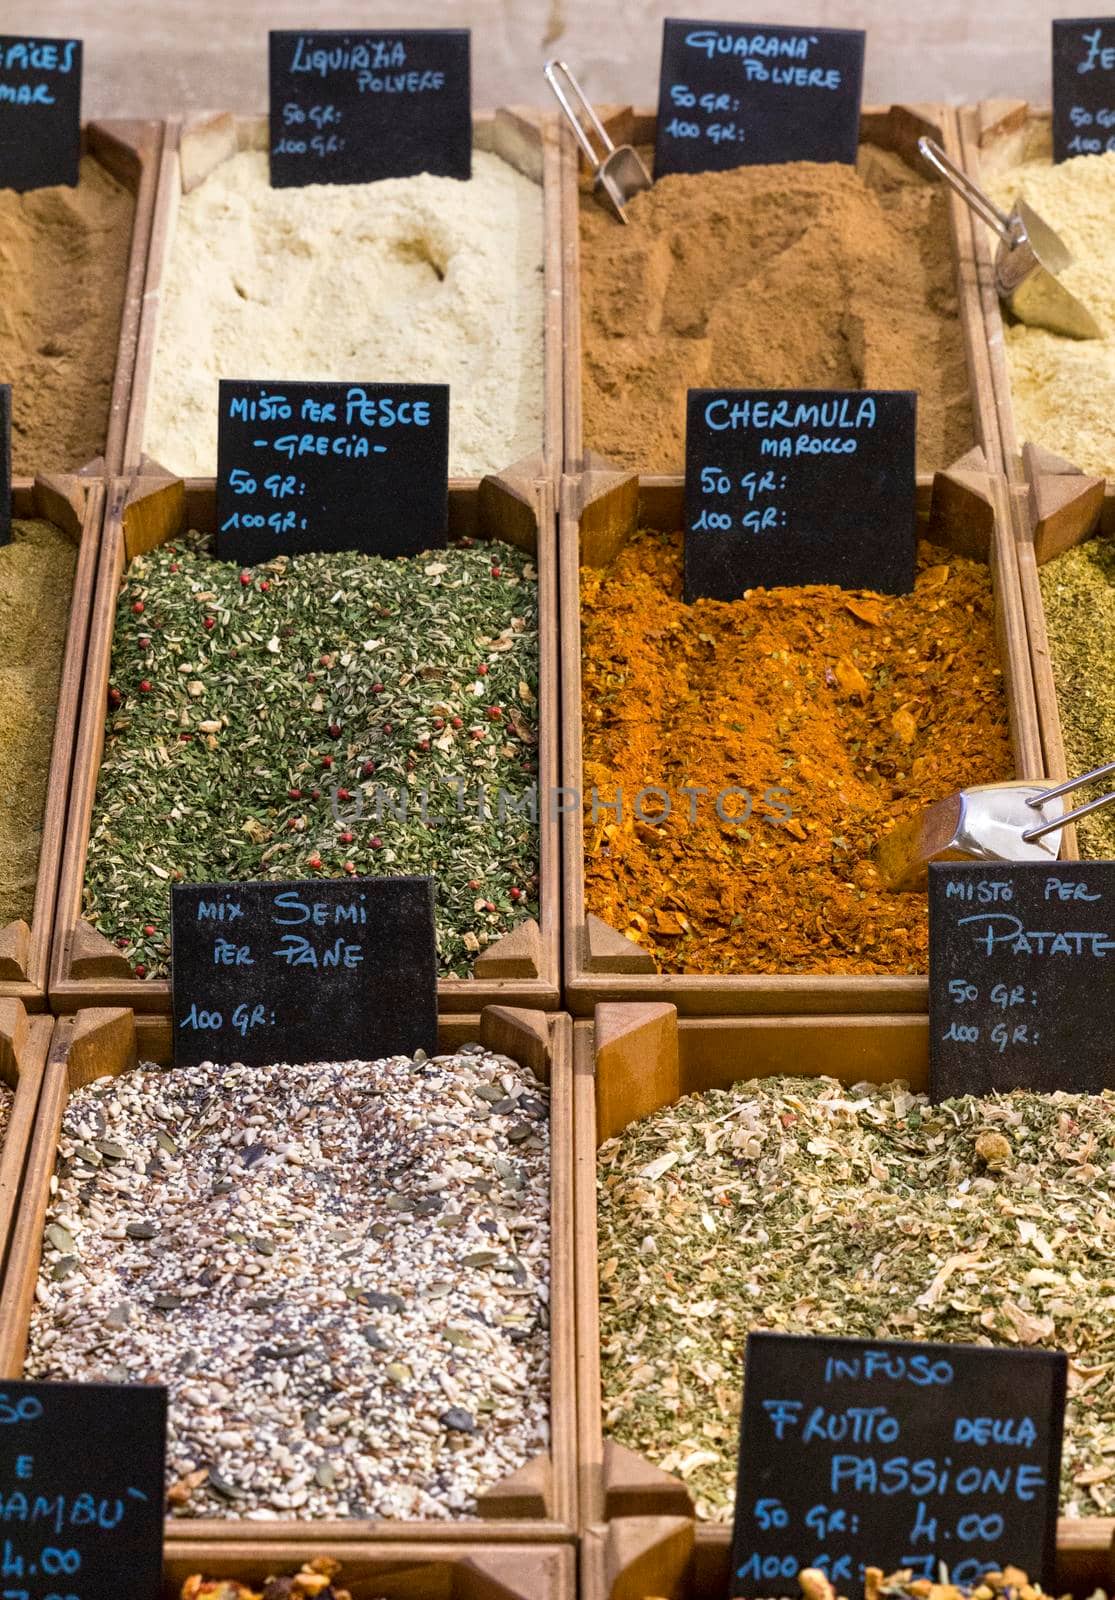 Indian multicolor spicy spices Sold in the market